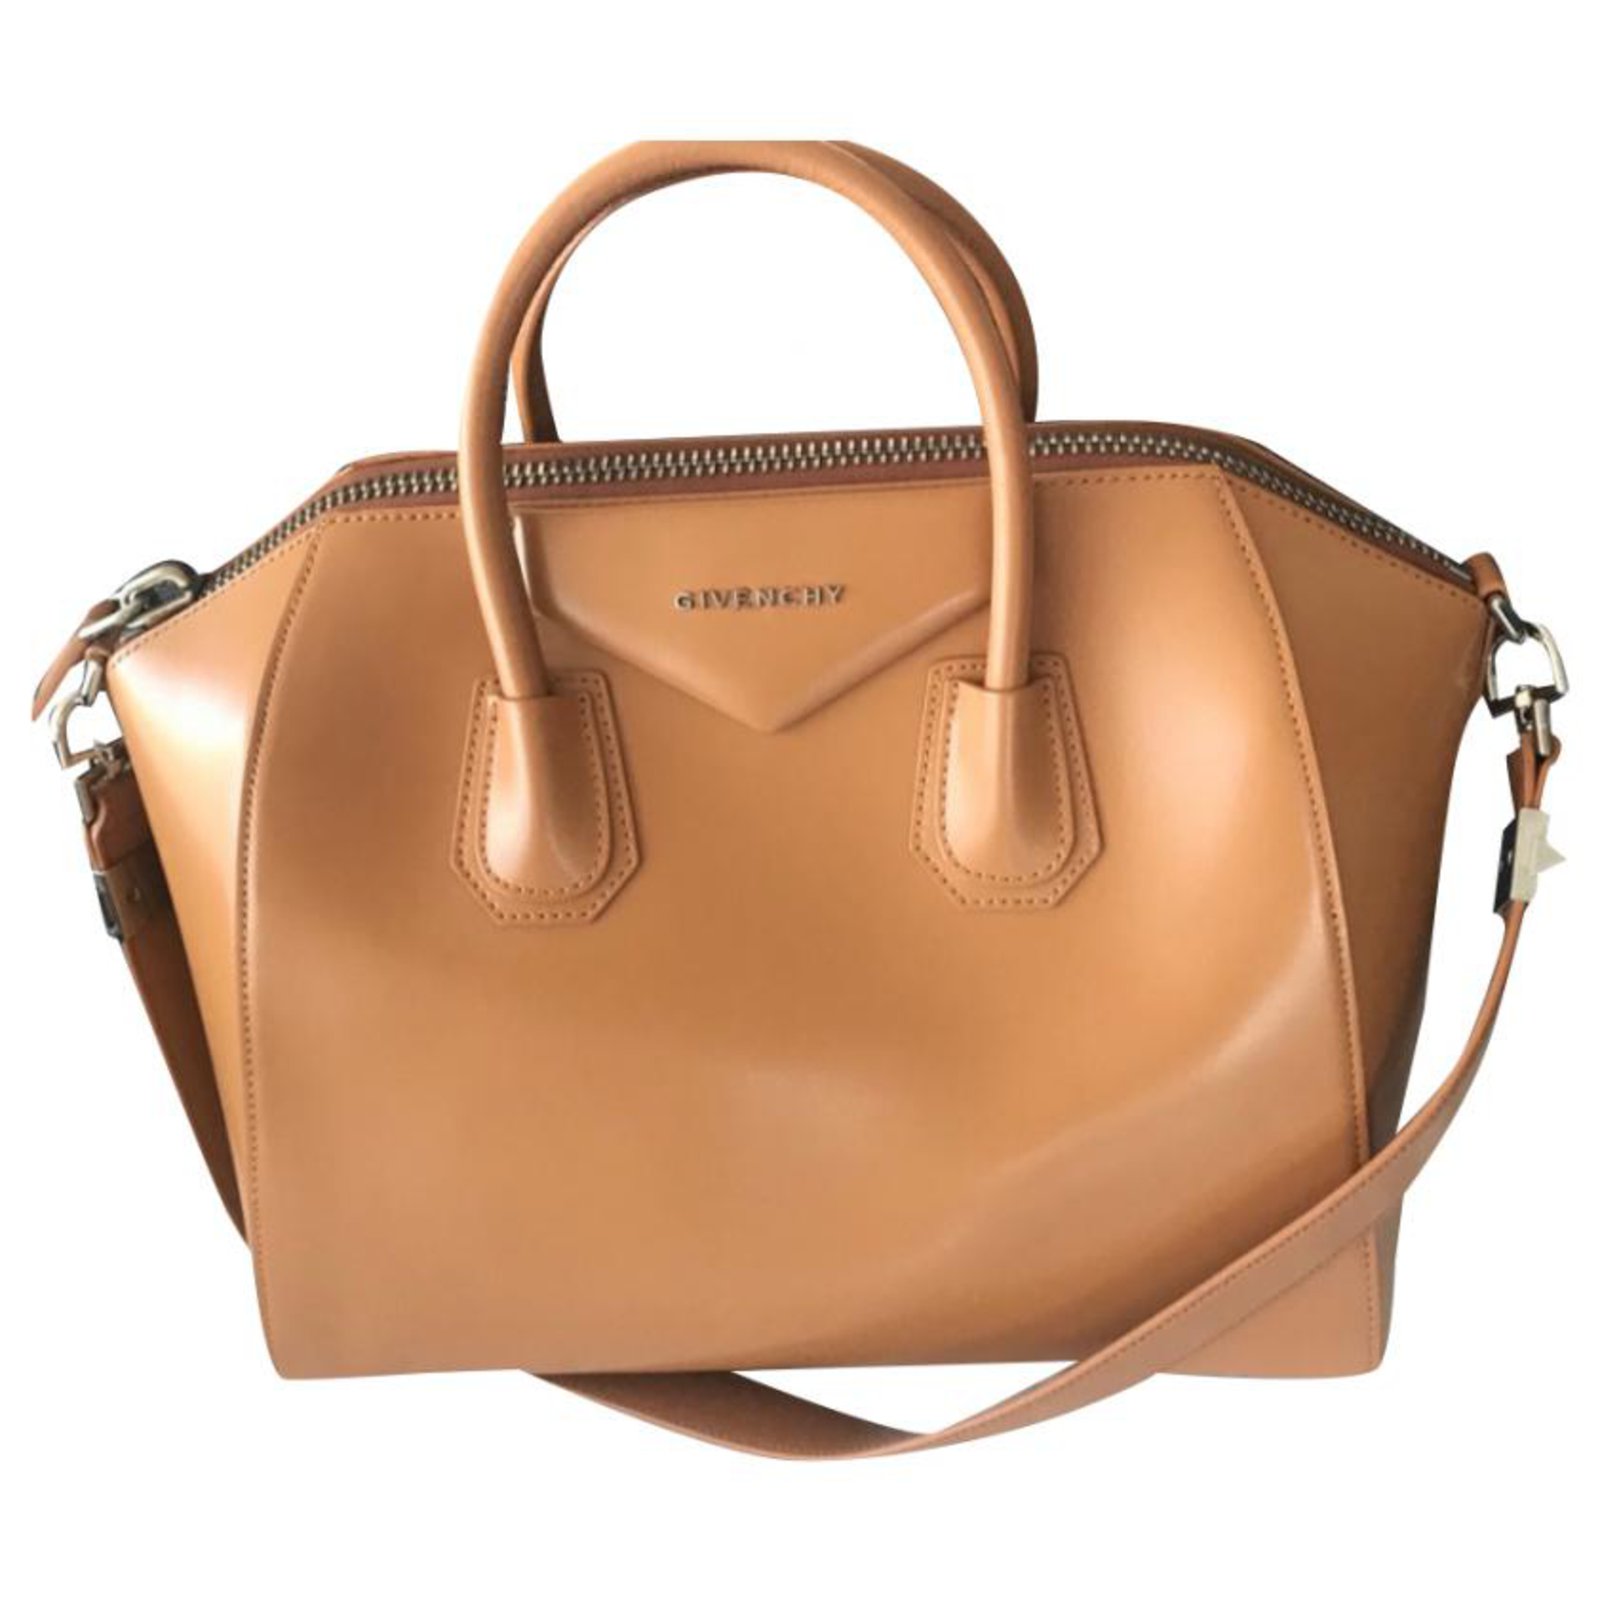 givenchy brown leather bag